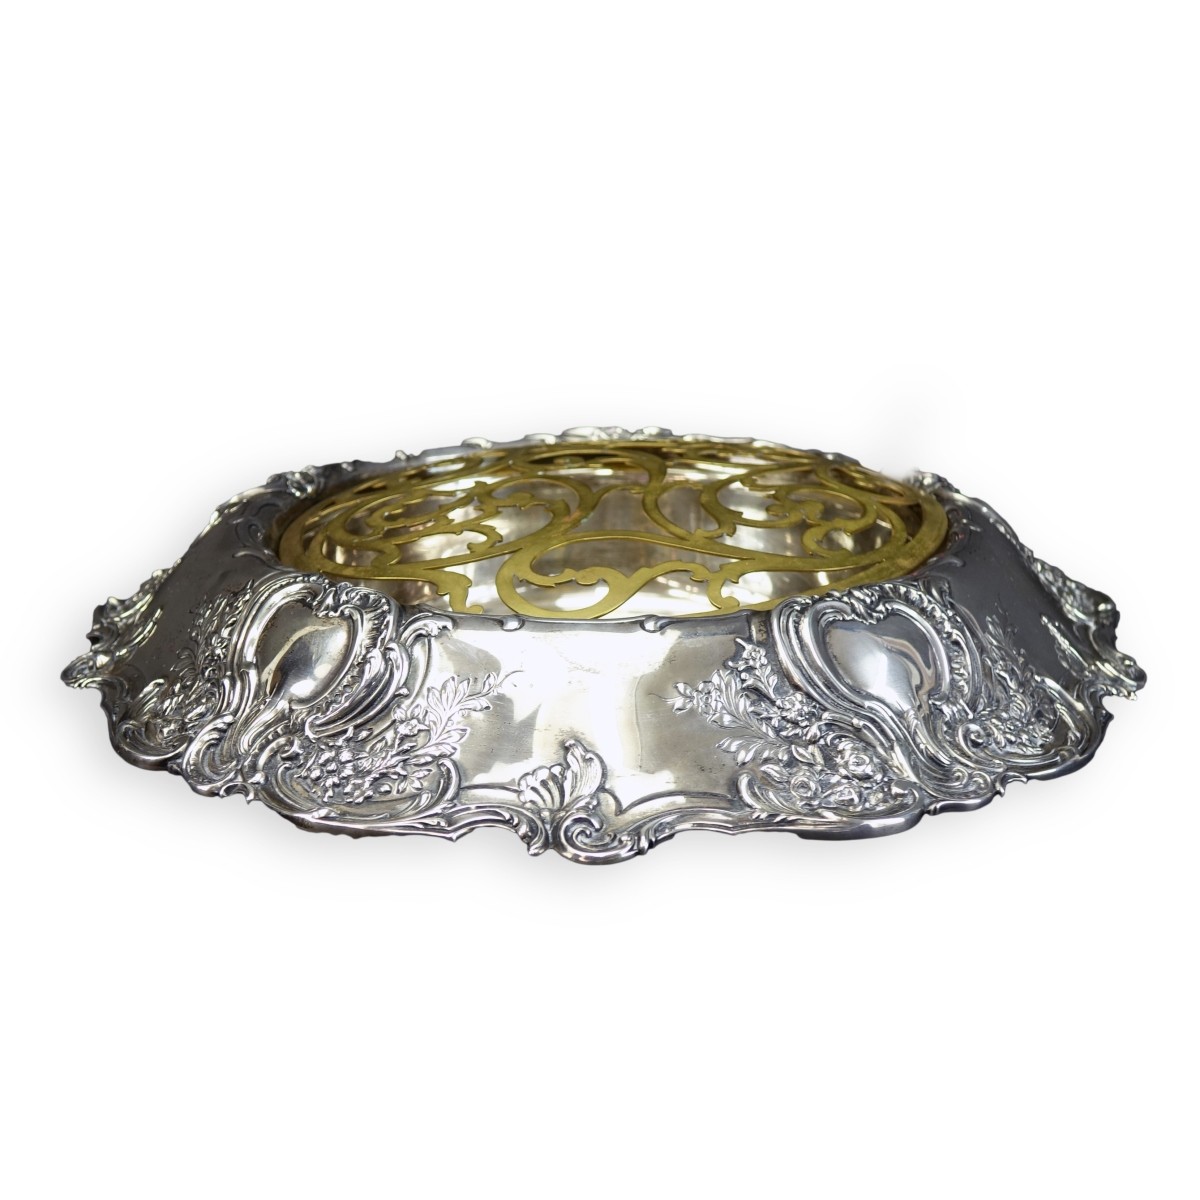 Tiffany Sterling Centerpiece Bowl with Frog